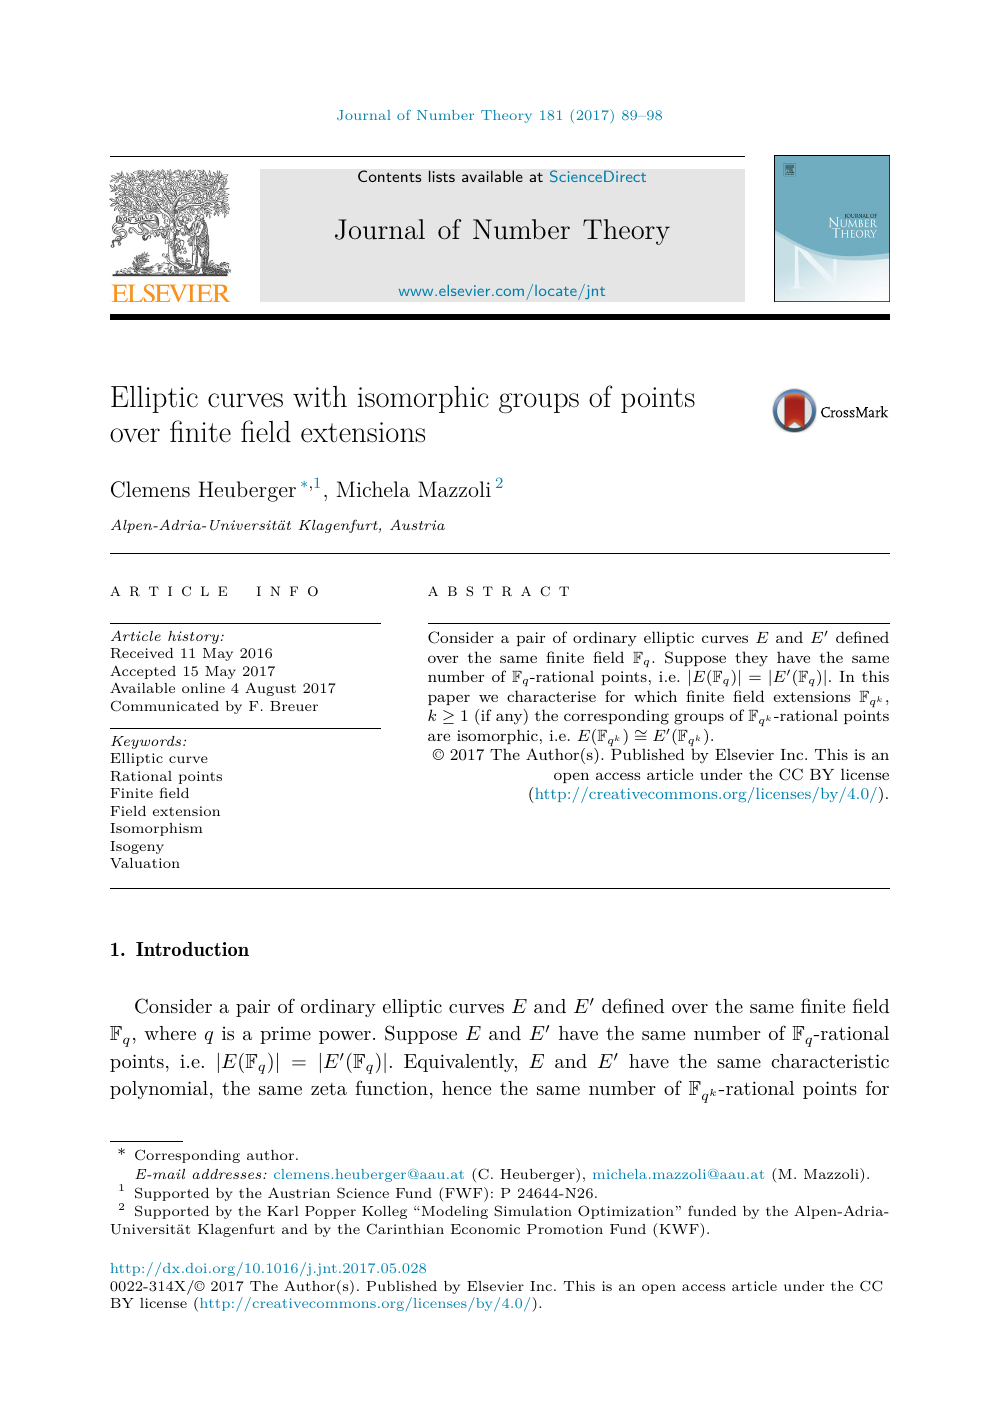 Elliptic Curves With Isomorphic Groups Of Points Over Finite Field Extensions Topic Of Research Paper In Mathematics Download Scholarly Article Pdf And Read For Free On Cyberleninka Open Science Hub